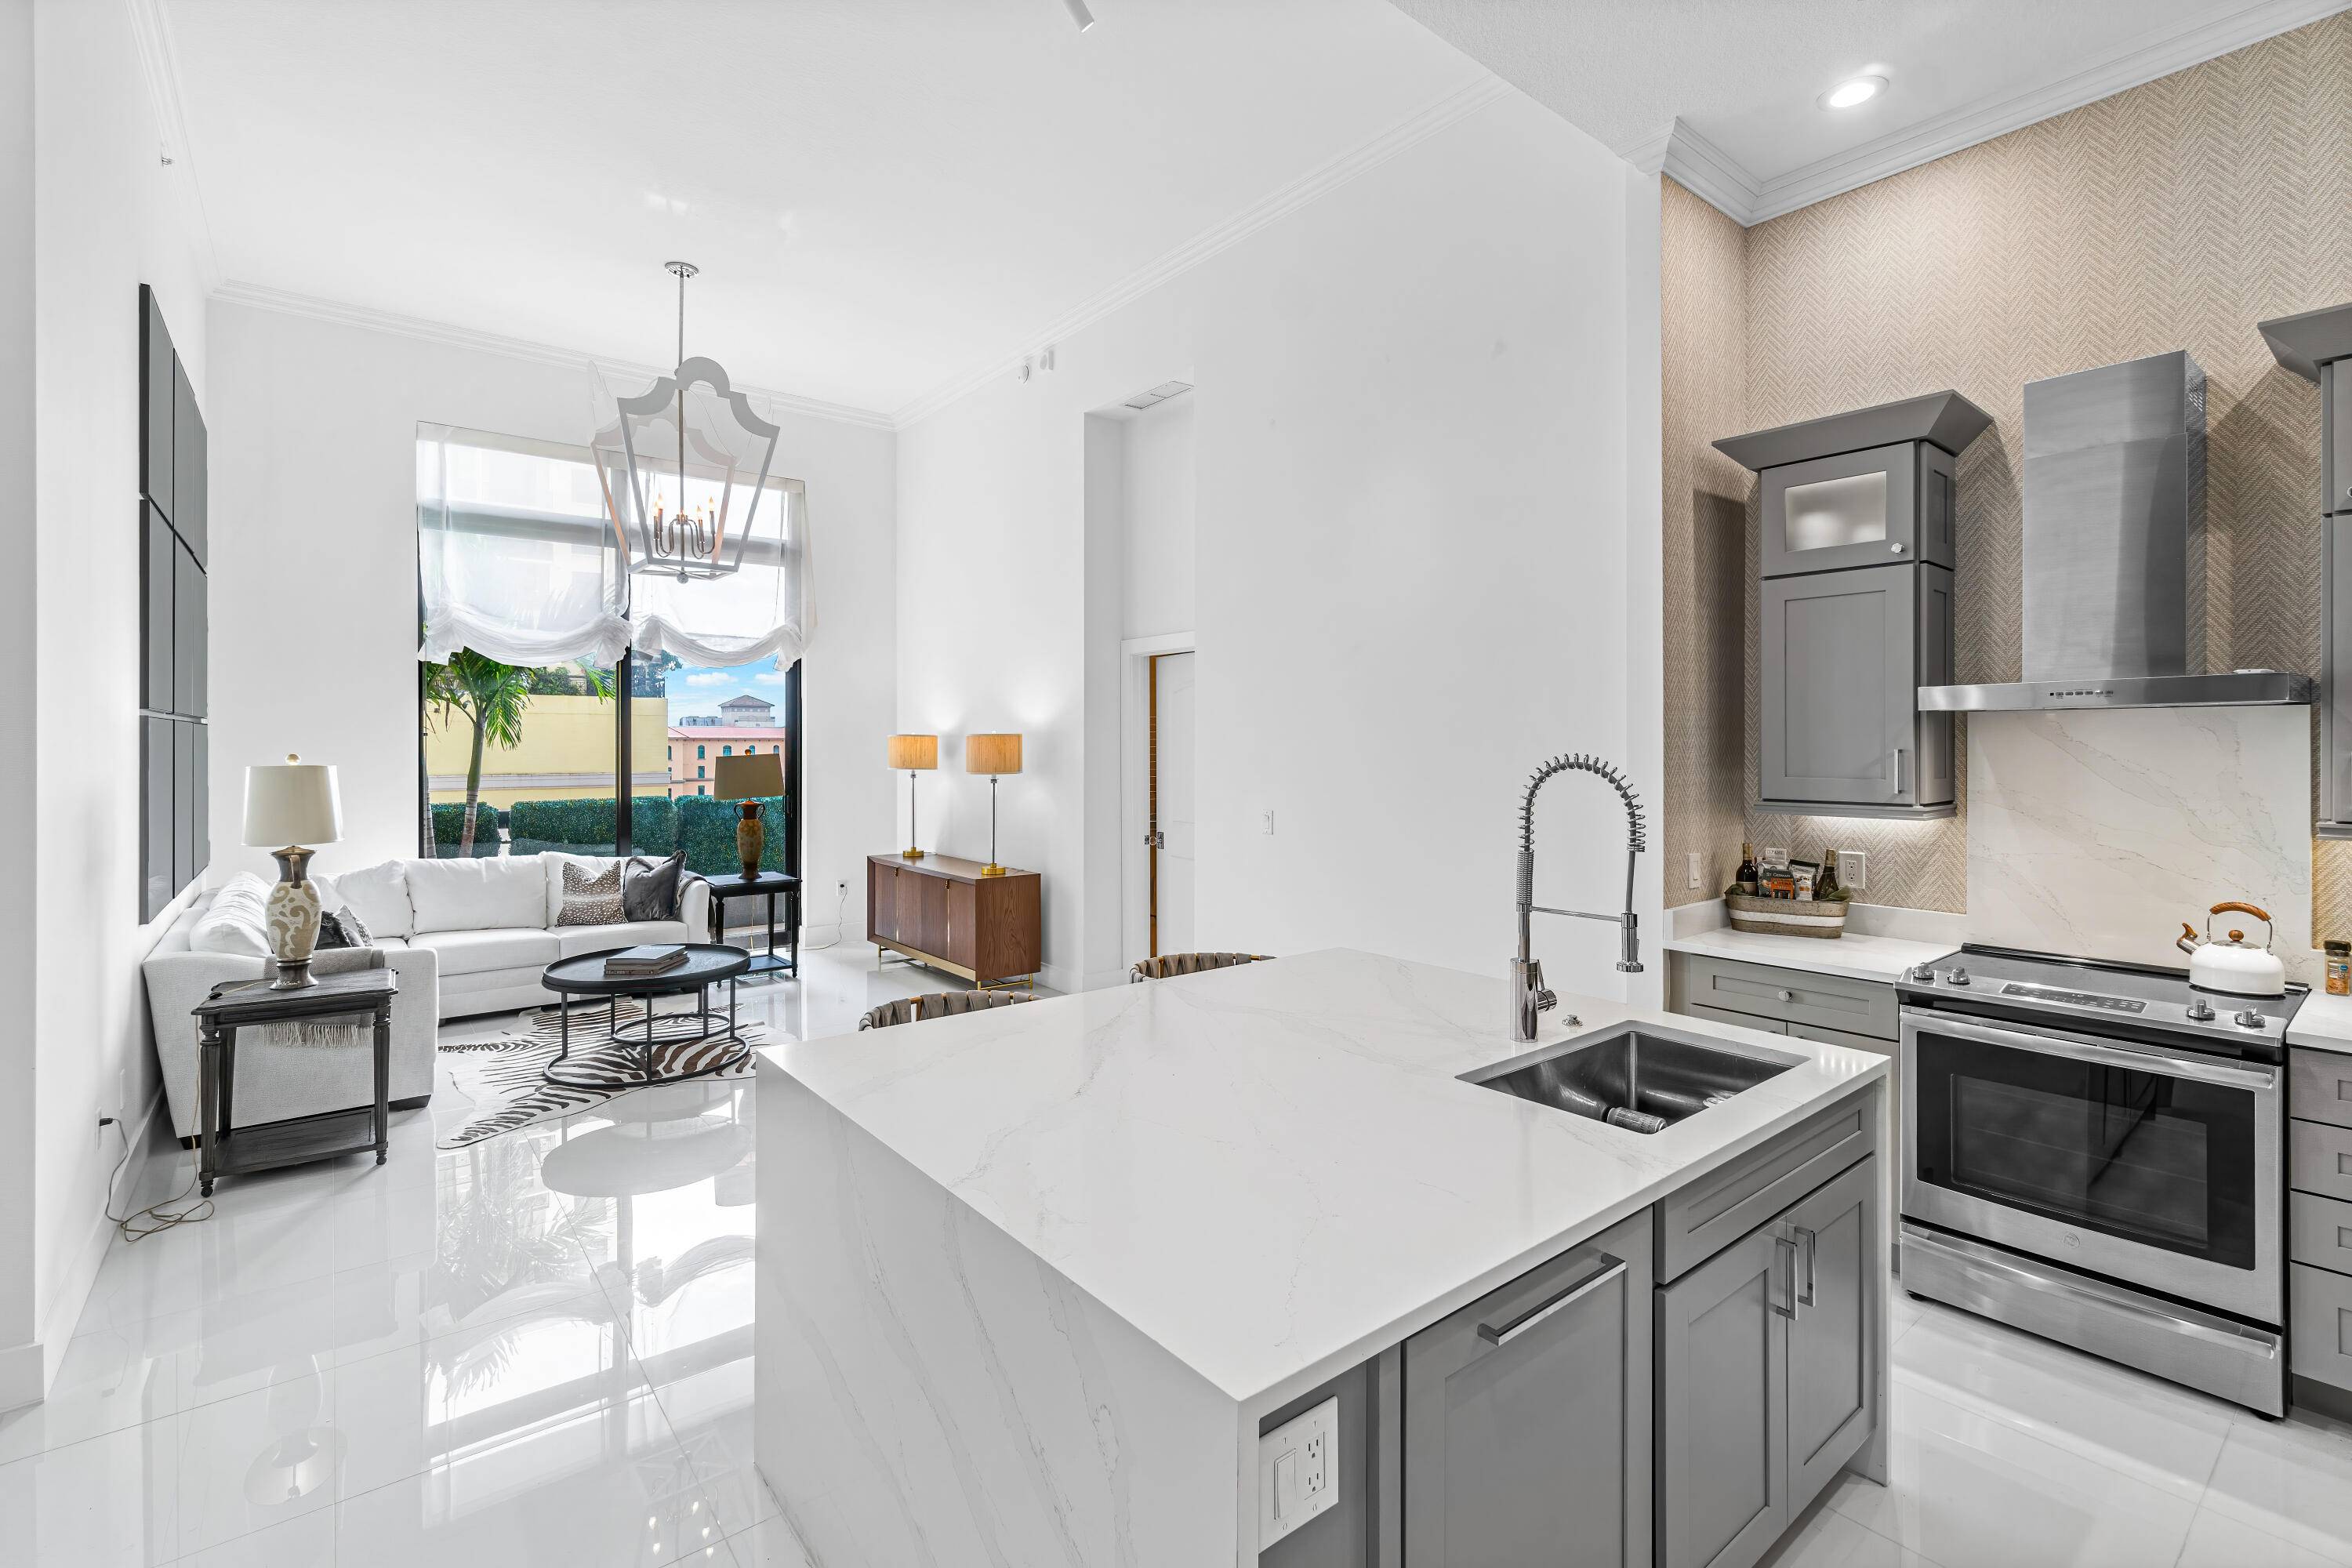 In the heart of downtown West Palm Beach, you'll find a stunning fully renovated condo that exudes modern luxury.